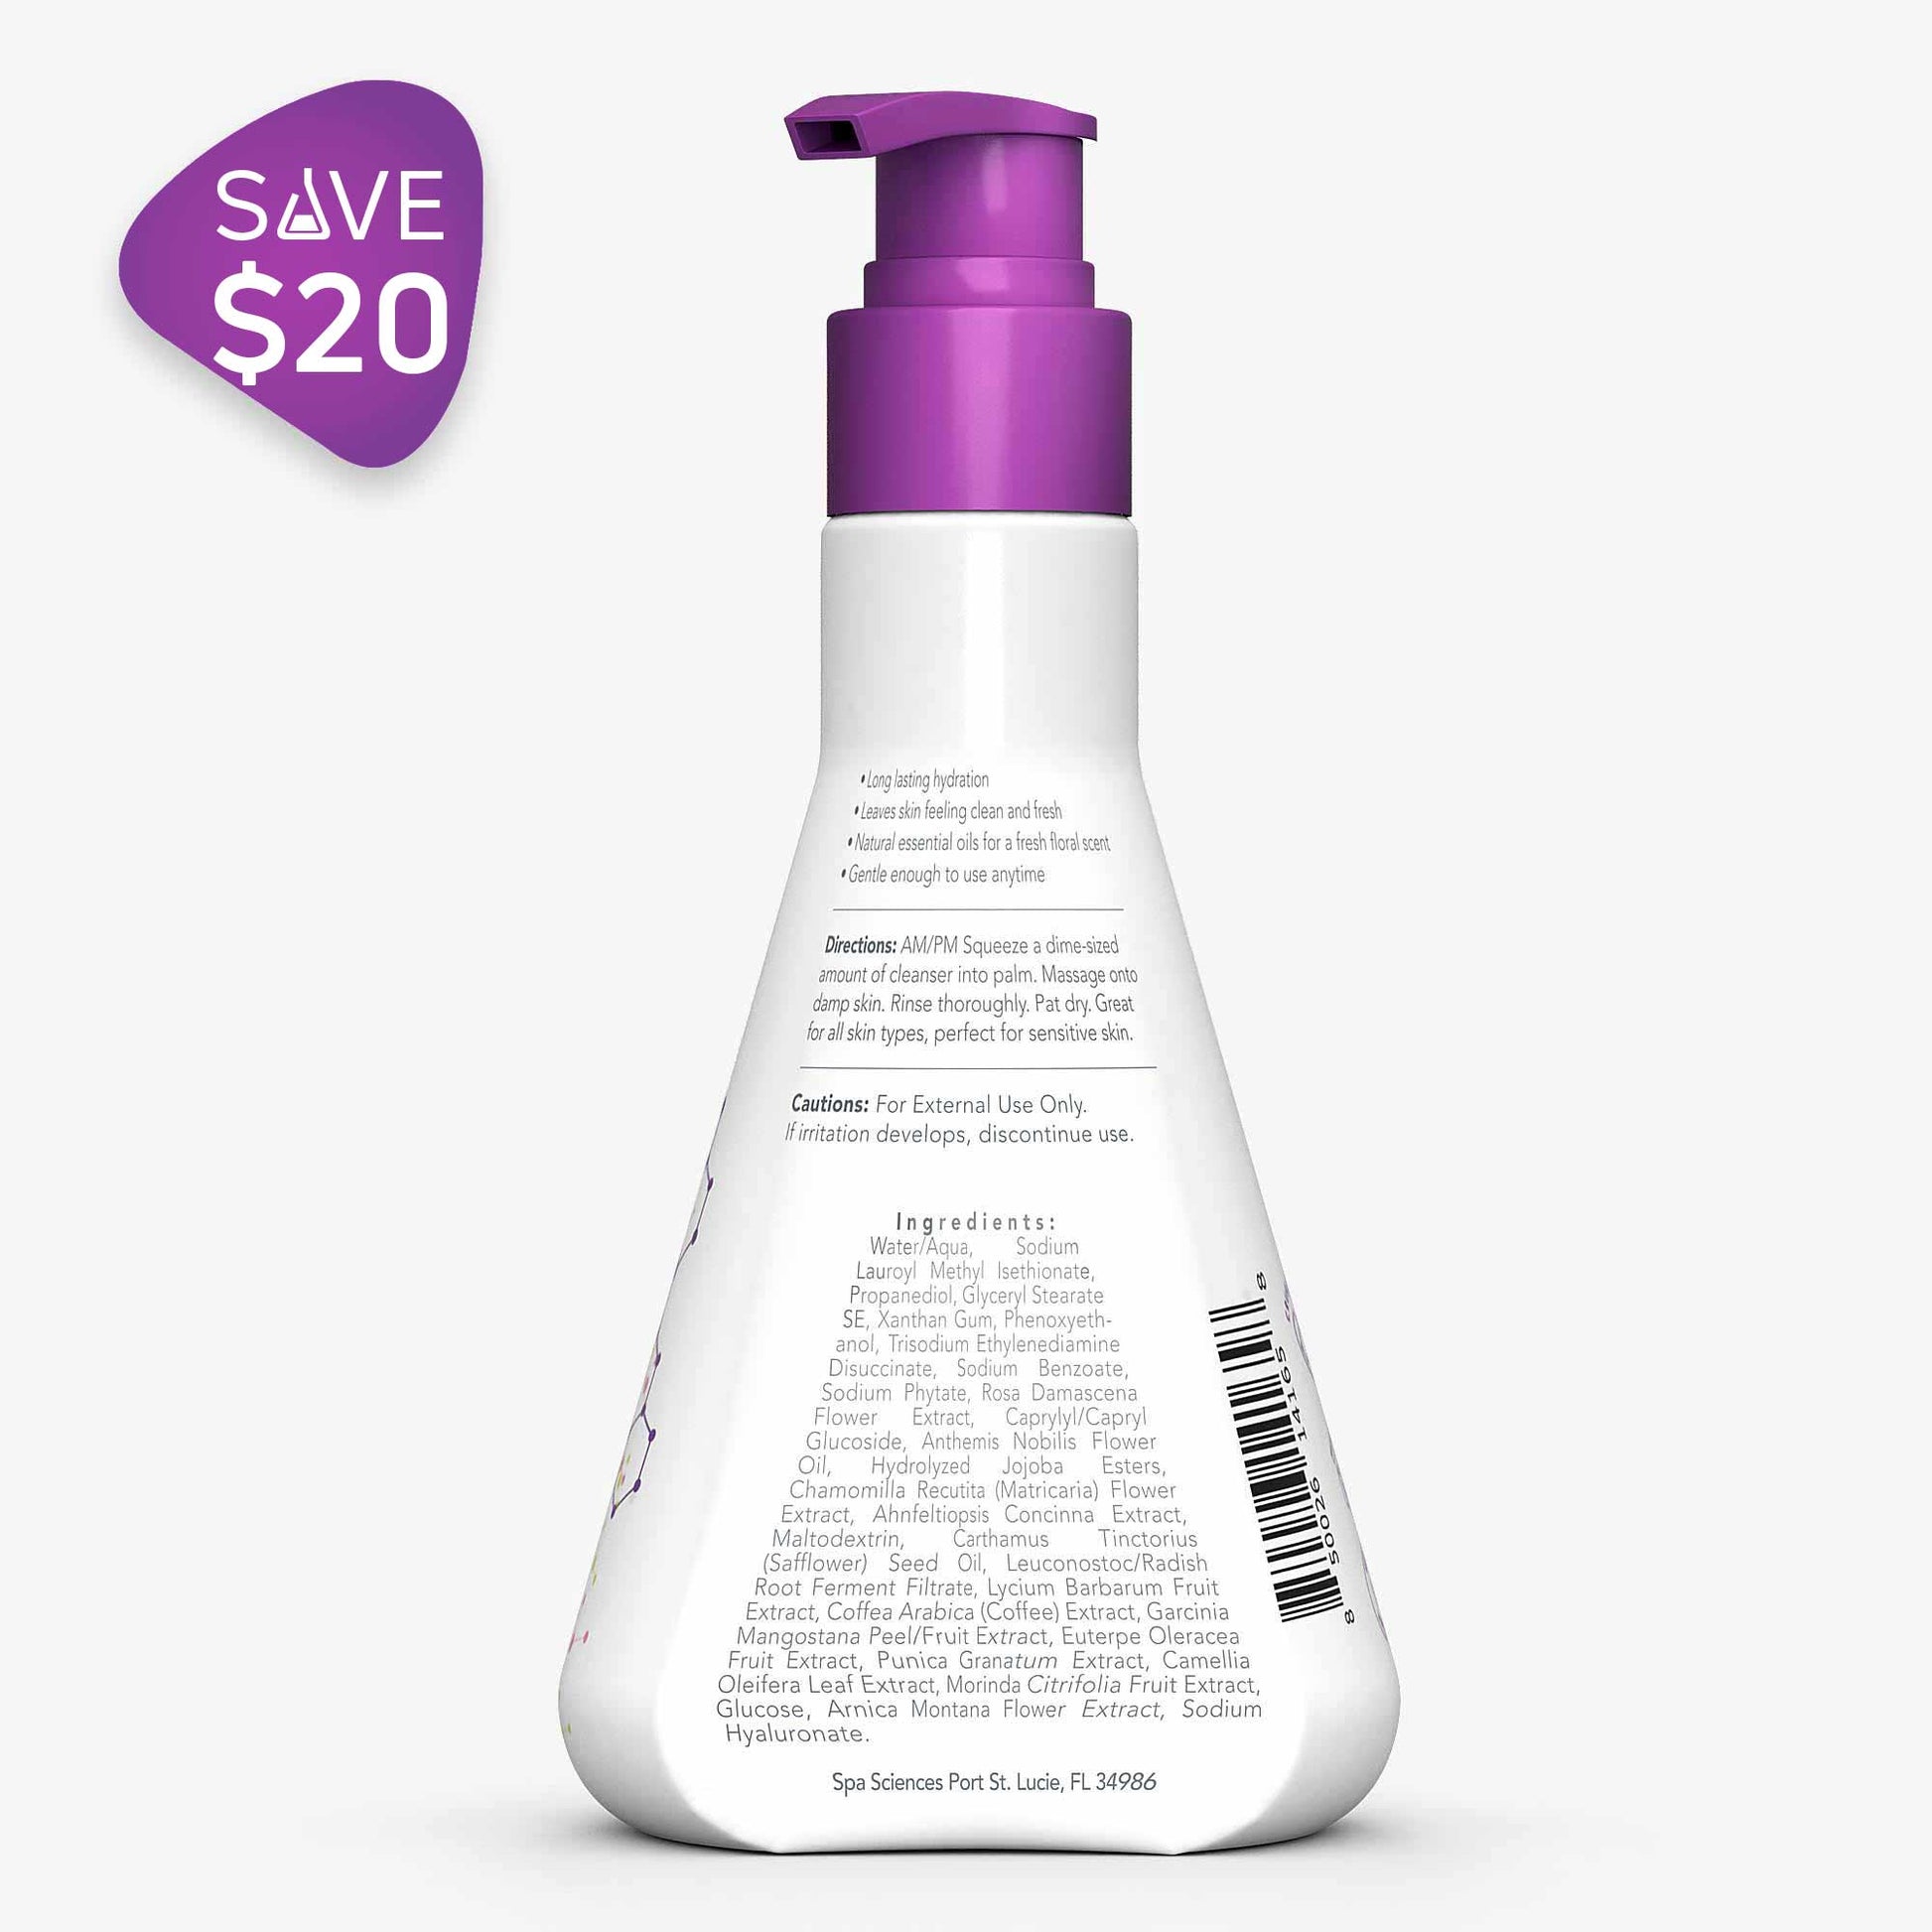 A bottle of Spa Sciences Silky Smooth Set lotion with a purple label on it.